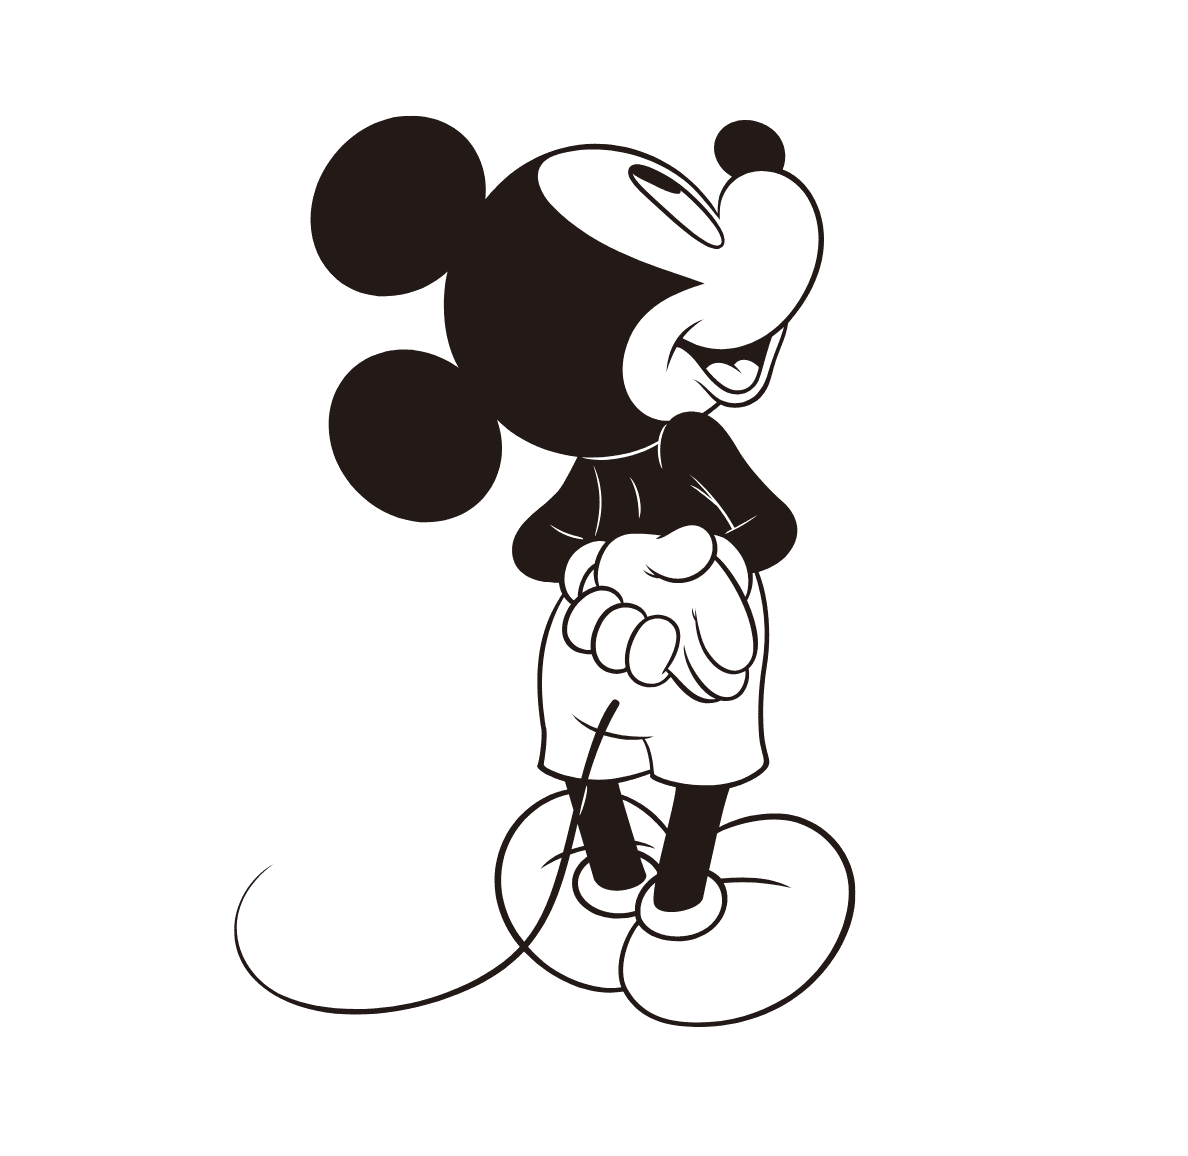 An animated GIF of Mickey Mouse, looking up while facing away, then turning around and playfully dancing.